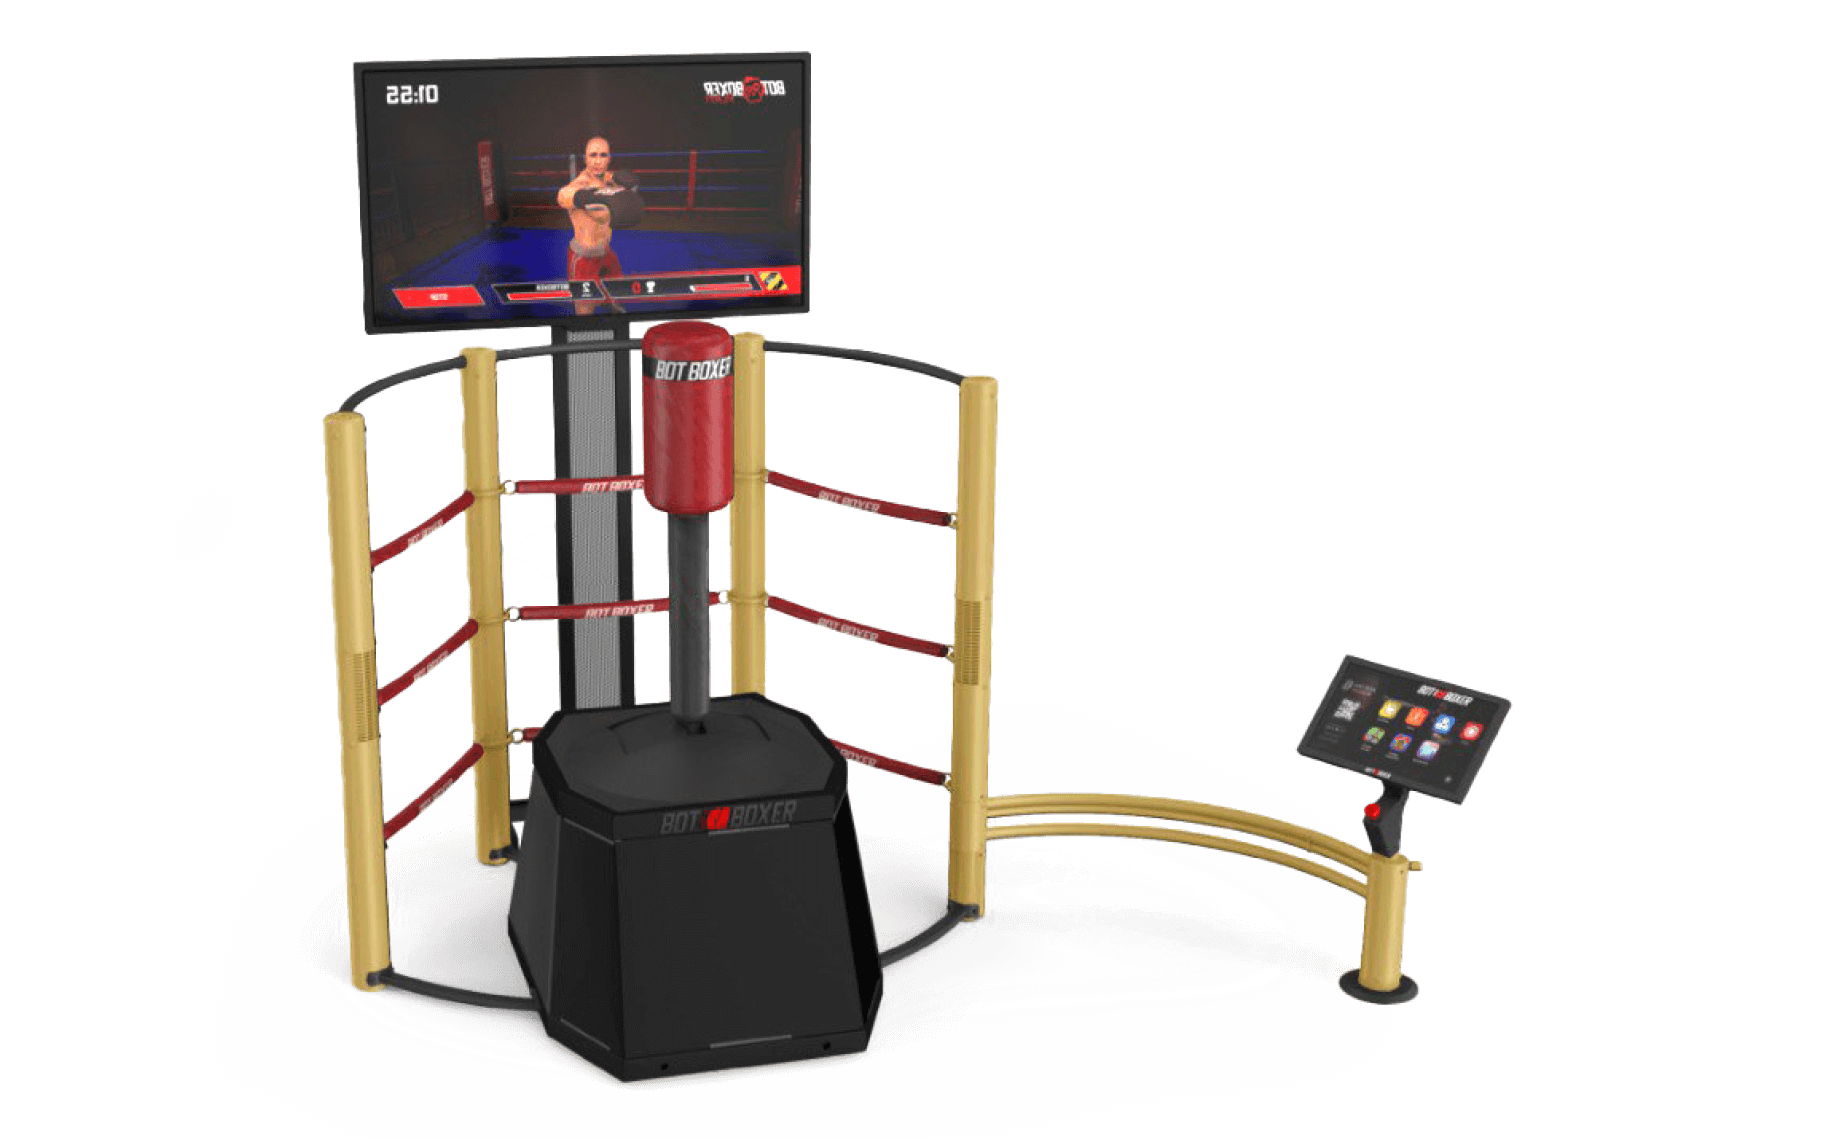 Luxury boxing simulator with AI is now available in Dubai and the Middle East!